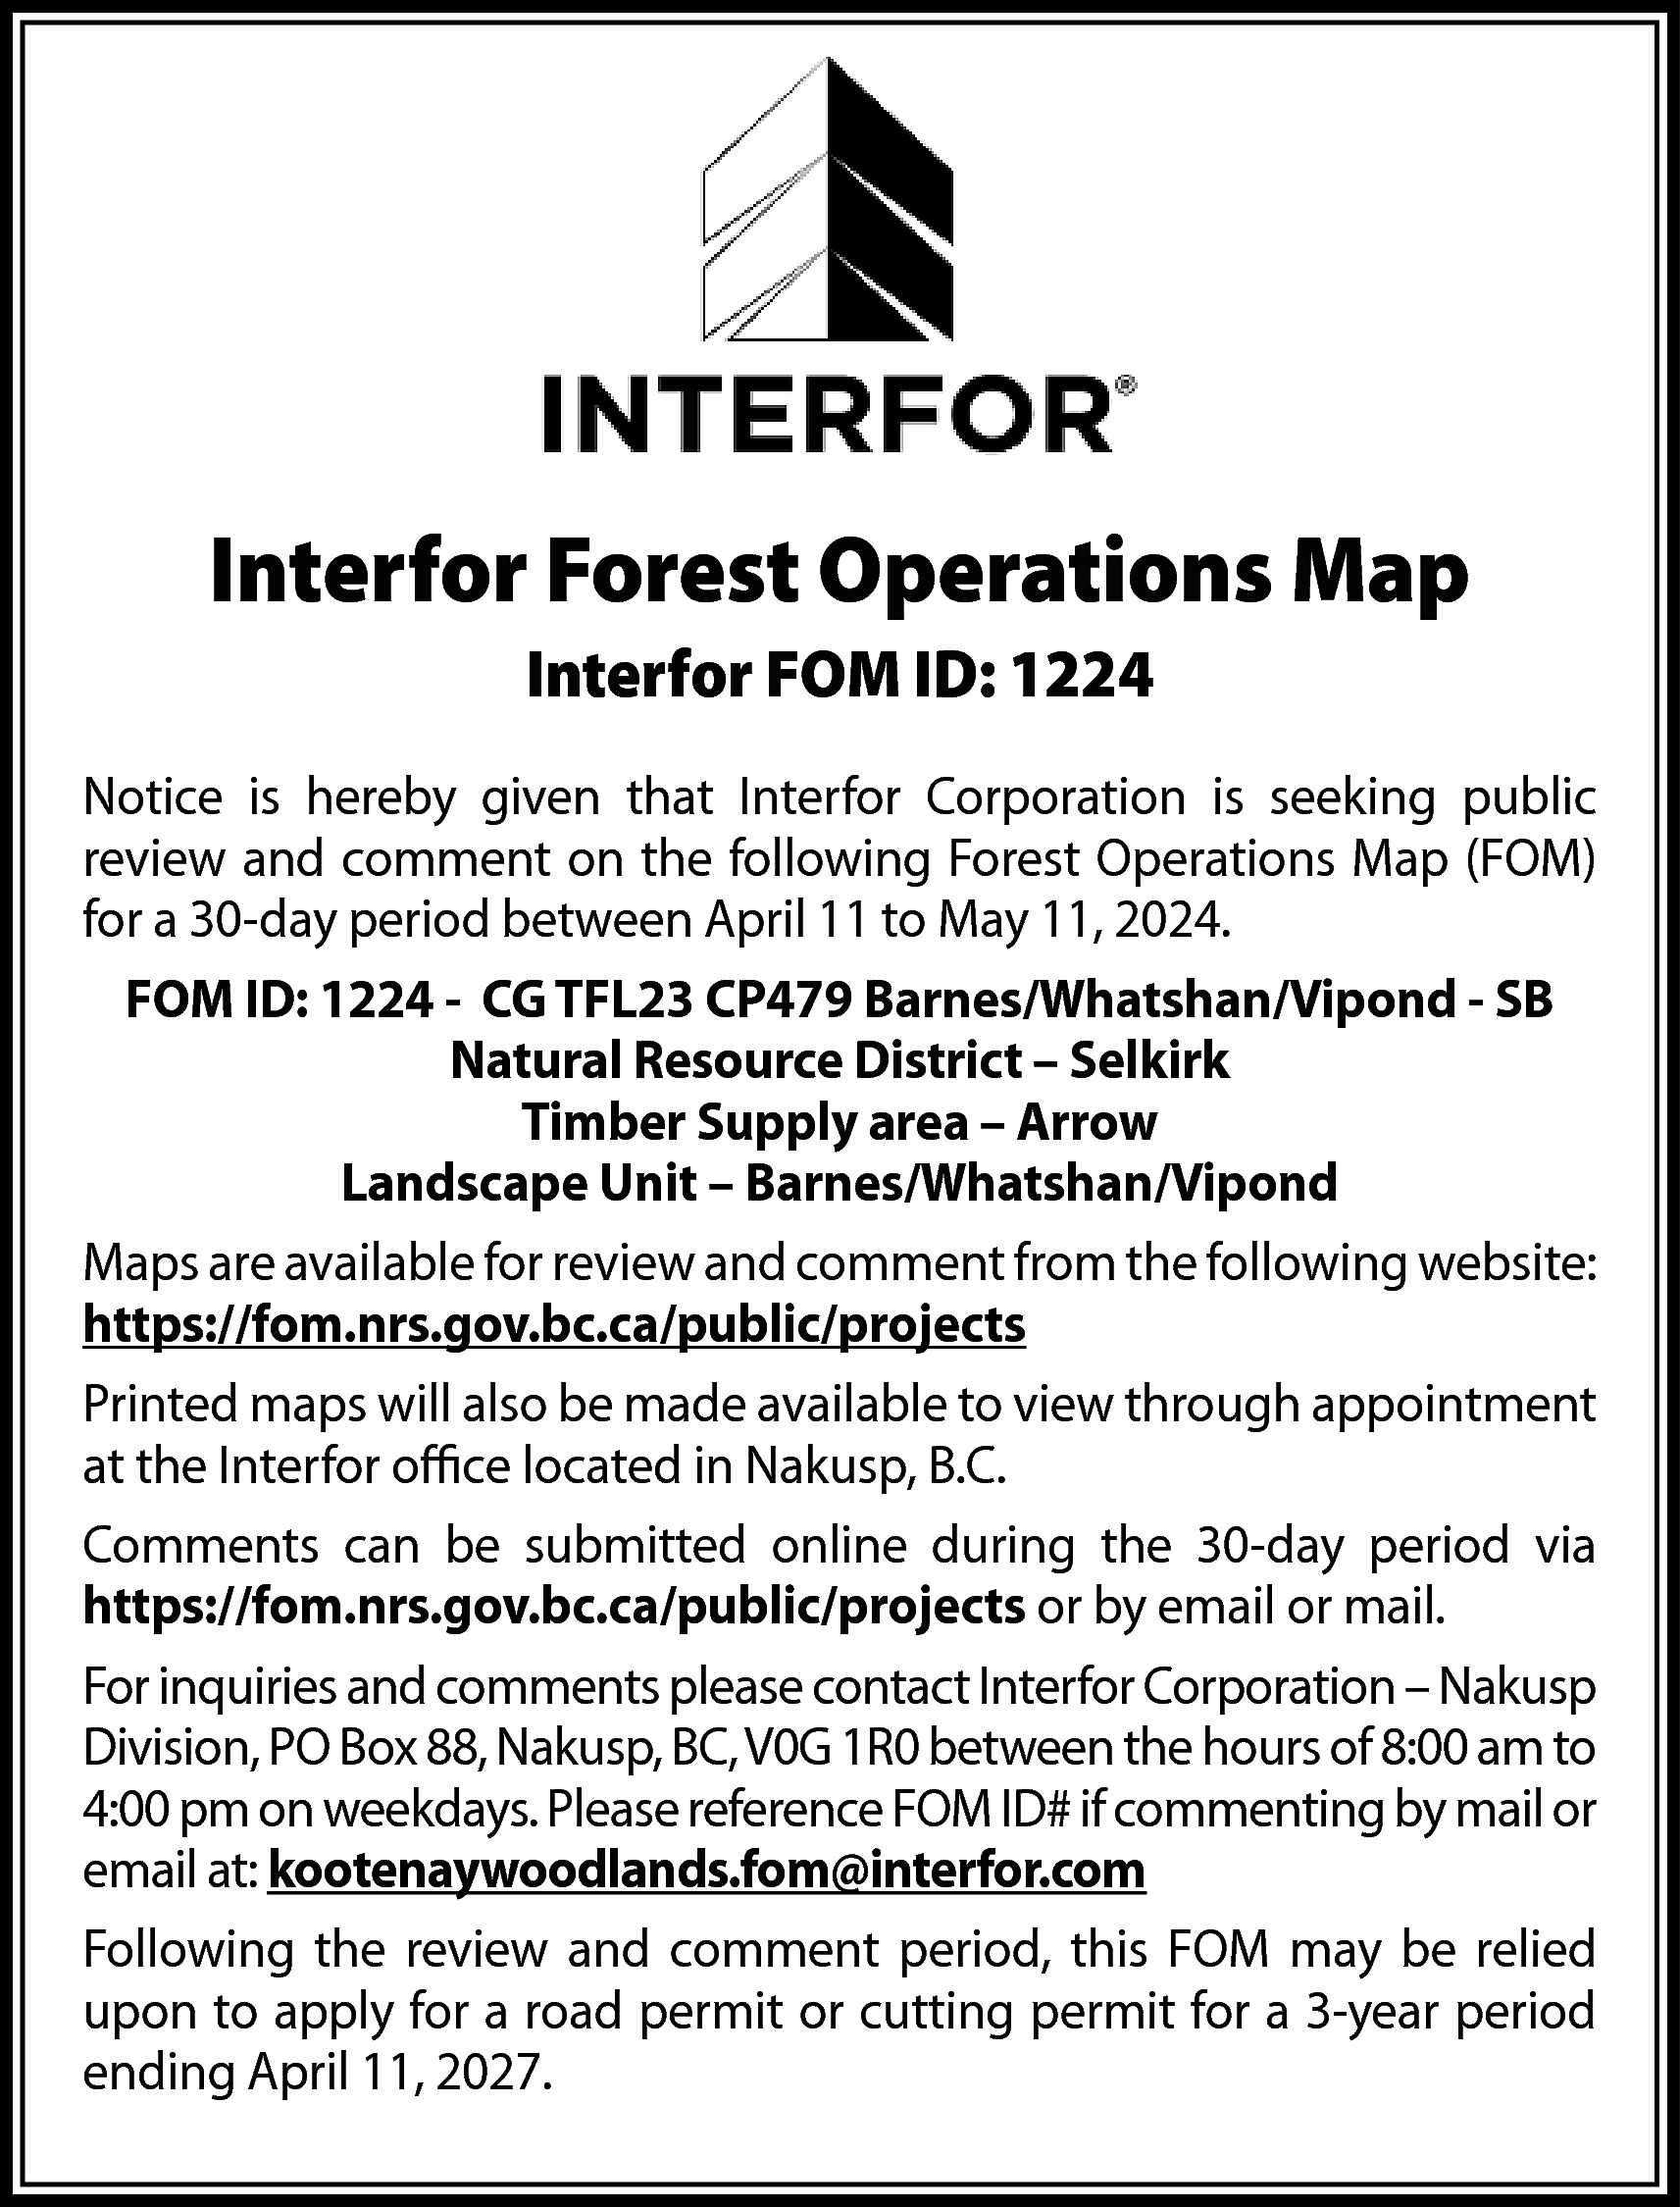 Interfor Forest Operations Map <br>Interfor  Interfor Forest Operations Map  Interfor FOM ID: 1224  Notice is hereby given that Interfor Corporation is seeking public  review and comment on the following Forest Operations Map (FOM)  for a 30-day period between April 11 to May 11, 2024.  FOM ID: 1224 - CG TFL23 CP479 Barnes/Whatshan/Vipond - SB  Natural Resource District – Selkirk  Timber Supply area – Arrow  Landscape Unit – Barnes/Whatshan/Vipond  Maps are available for review and comment from the following website:  https://fom.nrs.gov.bc.ca/public/projects  Printed maps will also be made available to view through appointment  at the Interfor office located in Nakusp, B.C.  Comments can be submitted online during the 30-day period via  https://fom.nrs.gov.bc.ca/public/projects or by email or mail.  For inquiries and comments please contact Interfor Corporation – Nakusp  Division, PO Box 88, Nakusp, BC, V0G 1R0 between the hours of 8:00 am to  4:00 pm on weekdays. Please reference FOM ID# if commenting by mail or  email at: kootenaywoodlands.fom@interfor.com  Following the review and comment period, this FOM may be relied  upon to apply for a road permit or cutting permit for a 3-year period  ending April 11, 2027.    